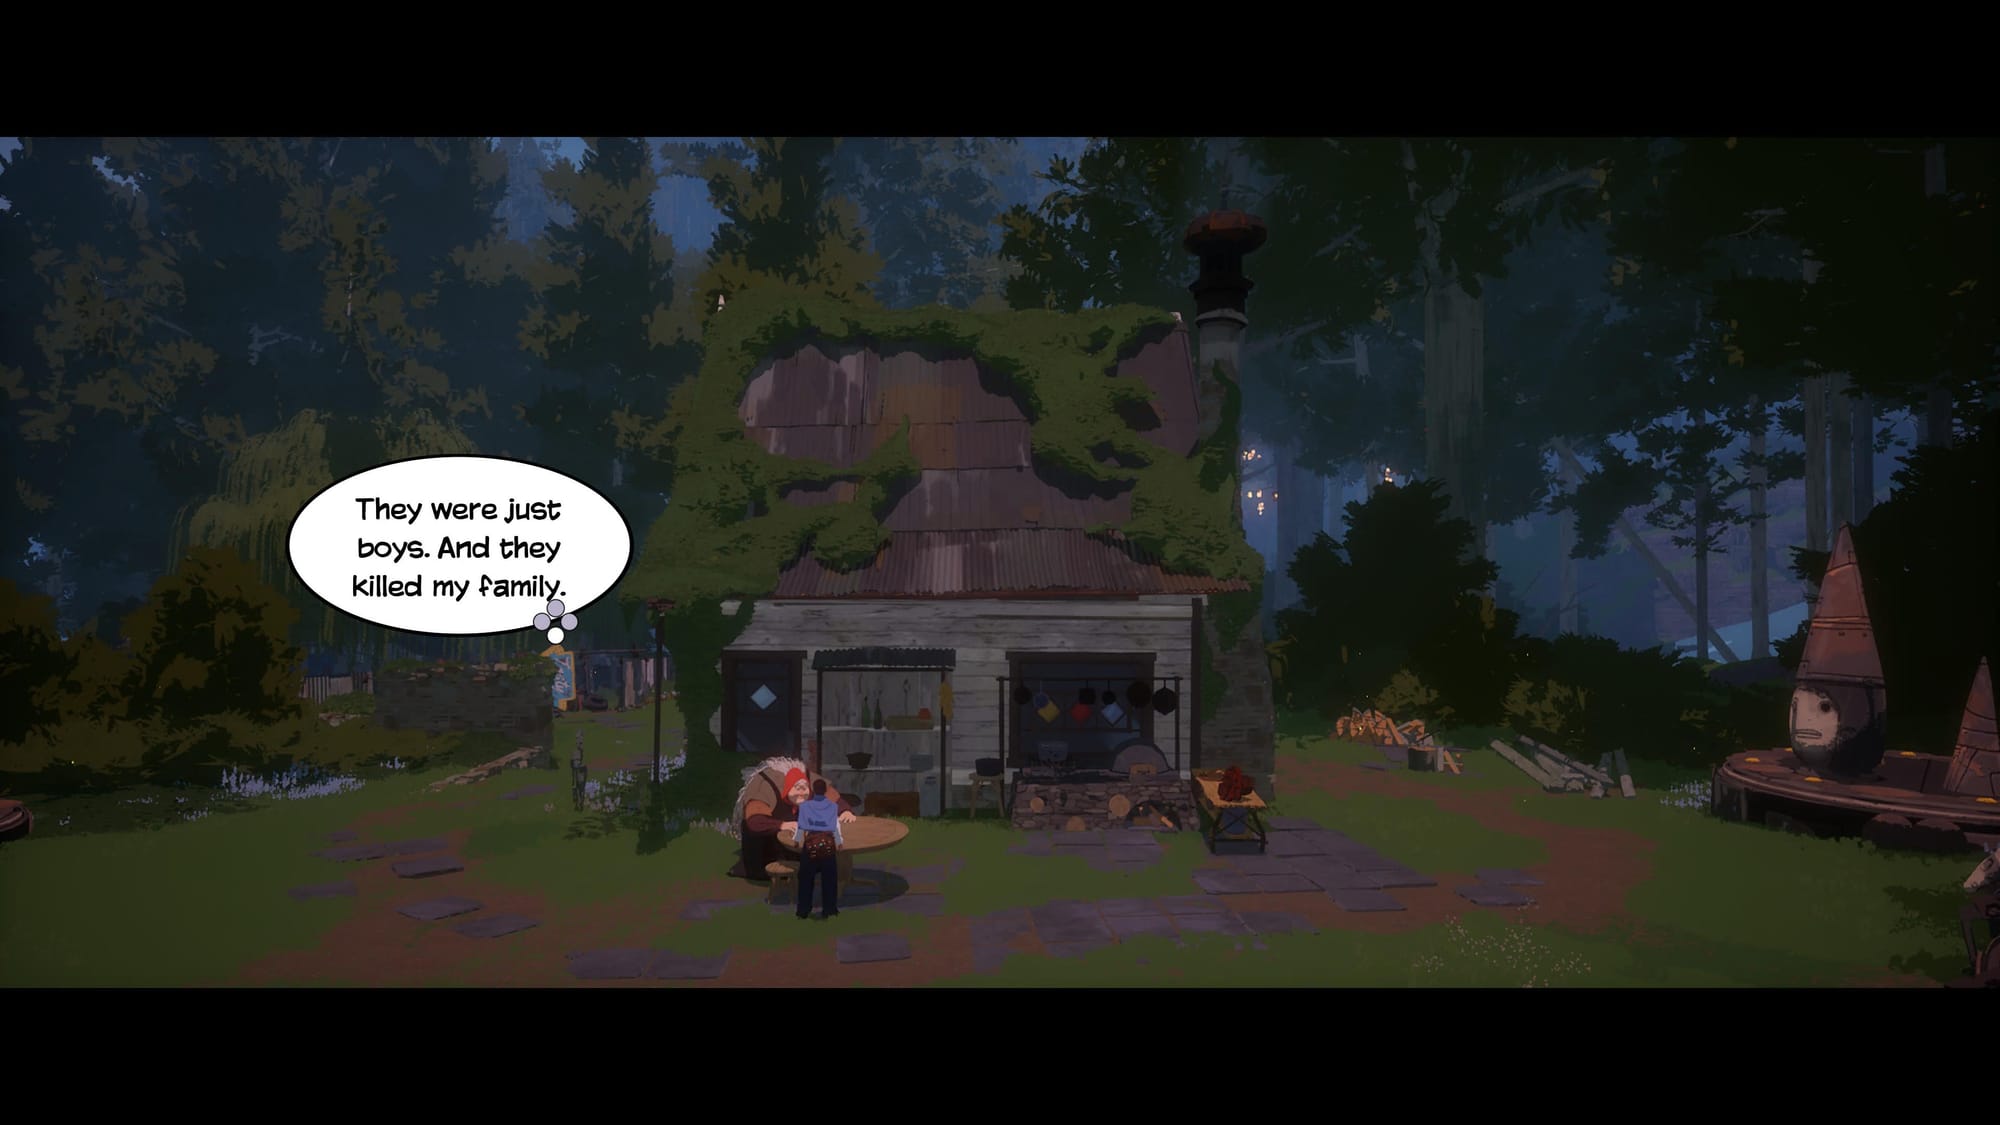 A screenshot with main character talking to a granny near her wooden house in the woods. A dialog bubble from the granny says: "They were jut boys. And they killed my family".